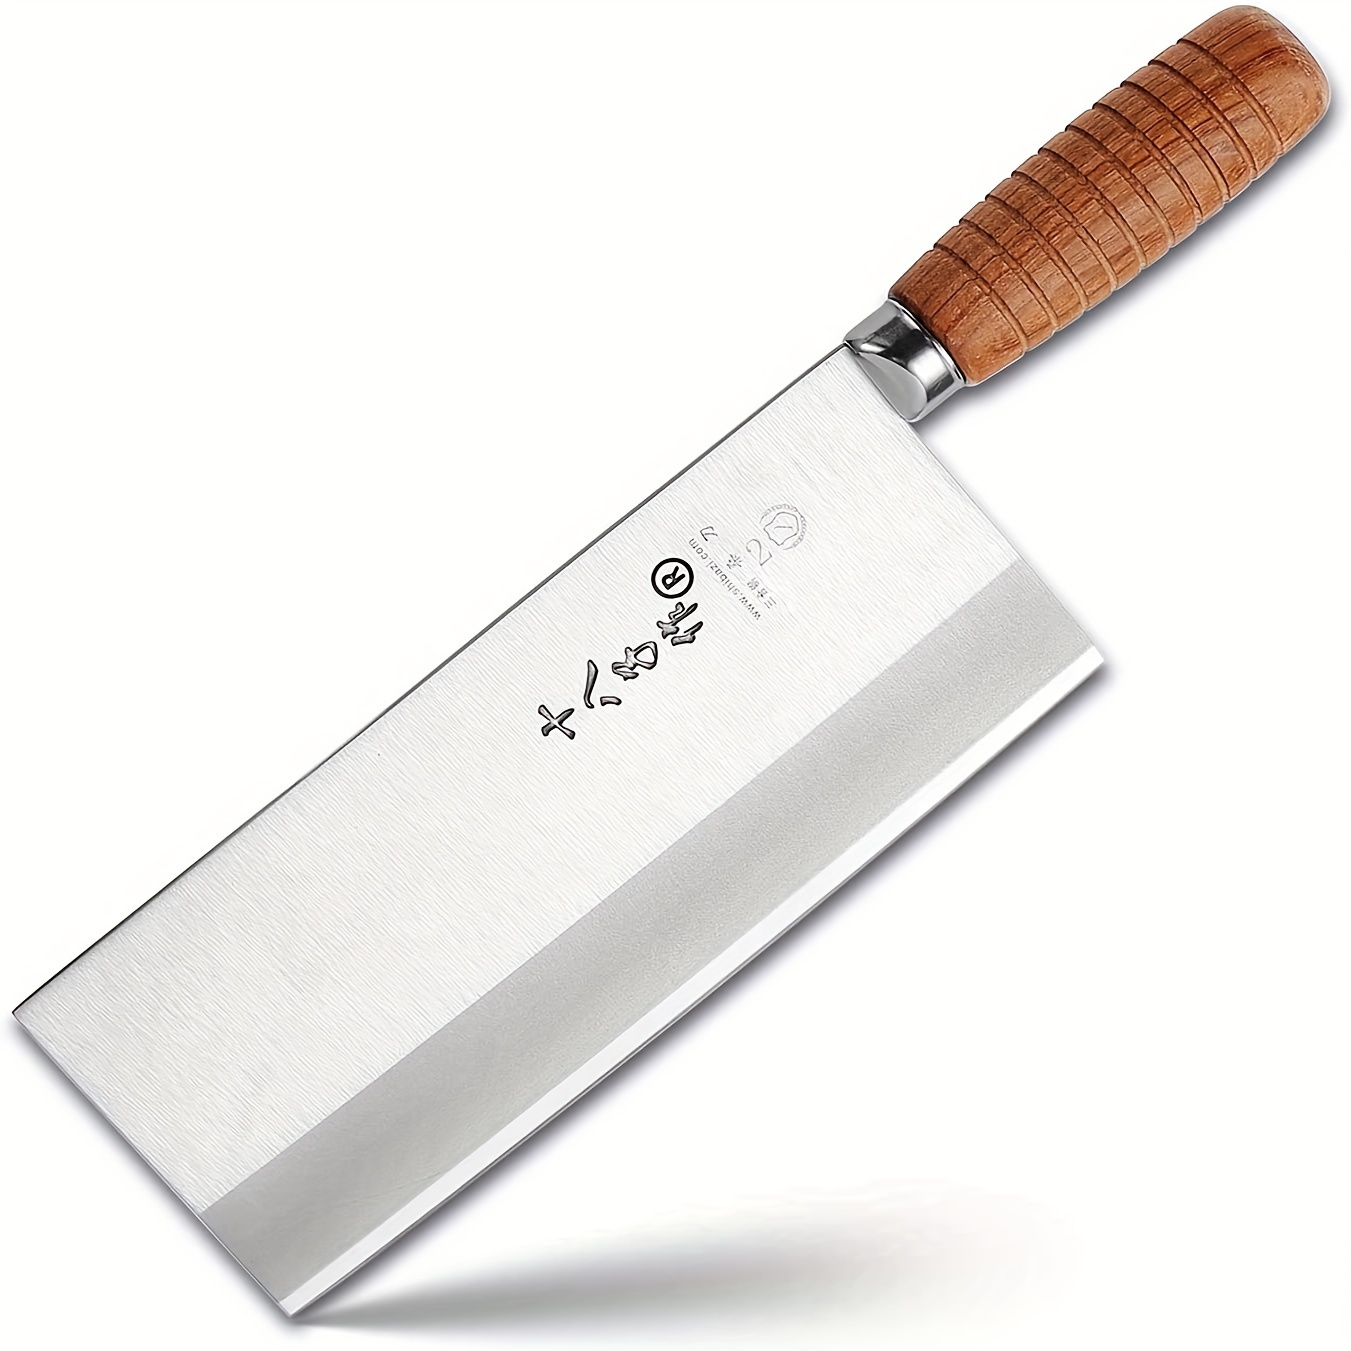 

Cleaver Knife Meat Cleaver 8-inch Professional Chef Knife Stainless Steel Vegetable Knife Safe Non-stick Finish Blade With Anti-slip Wooden Handle